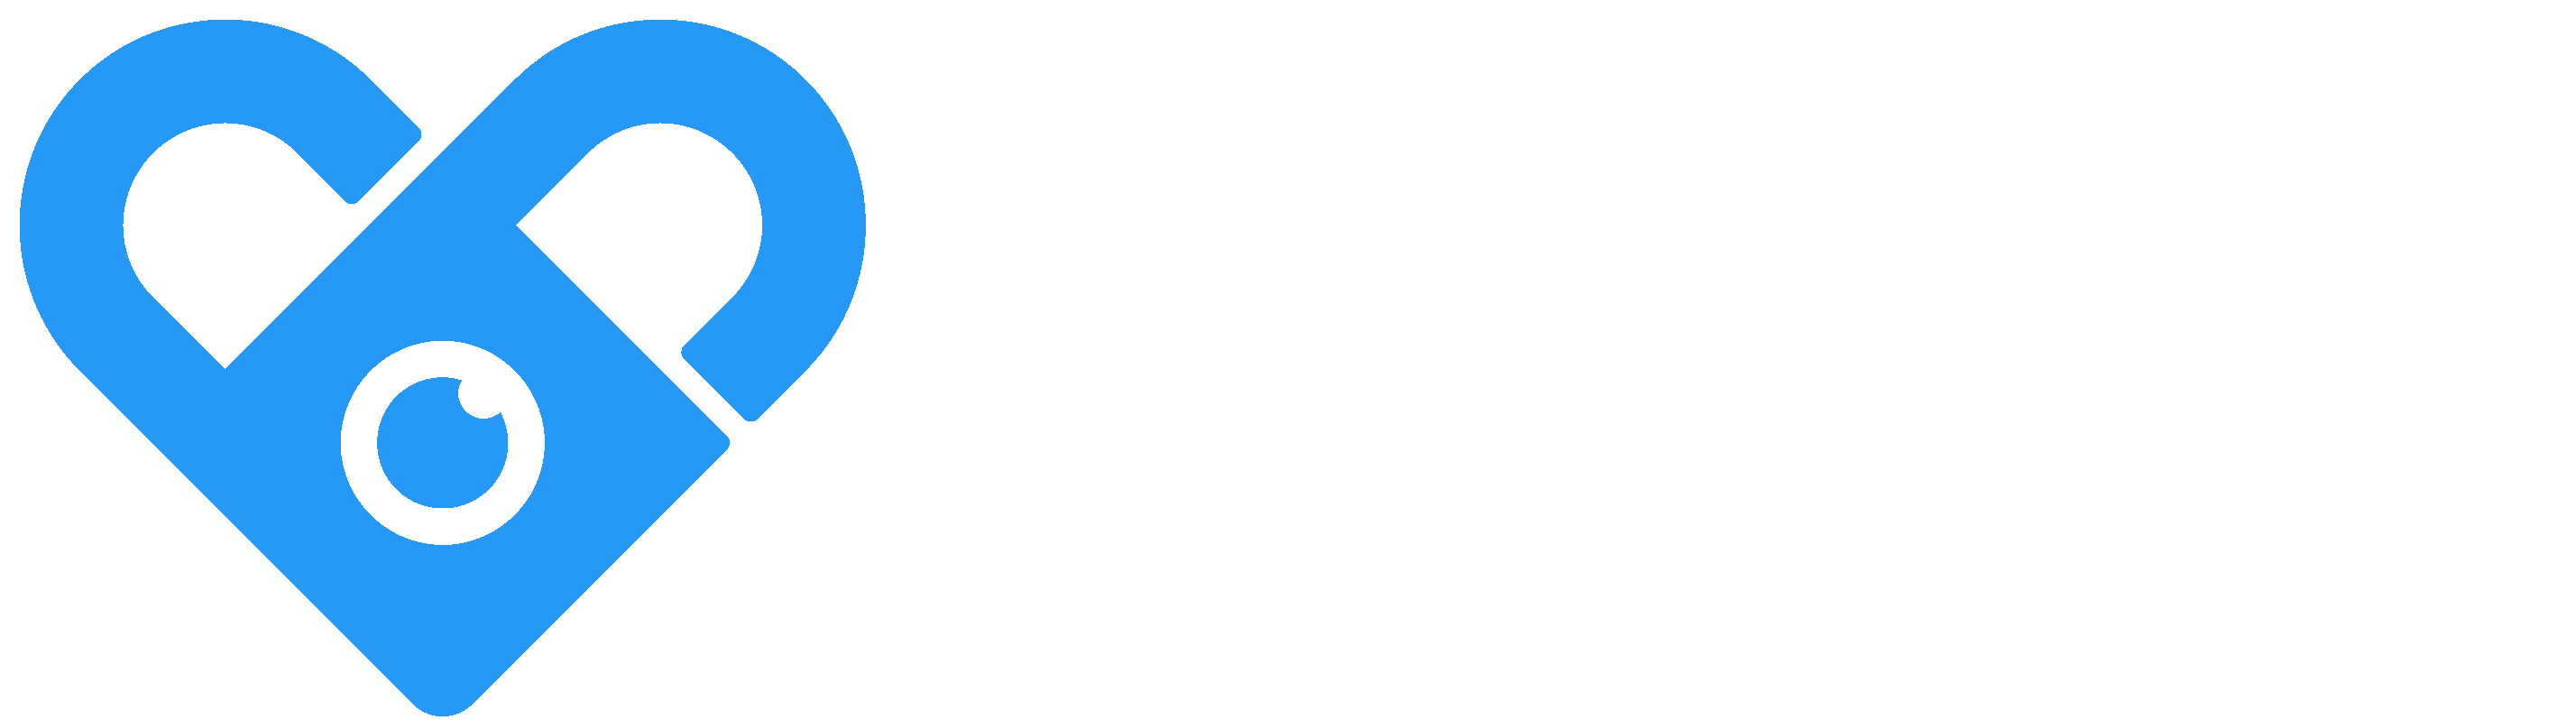 What is fansly website